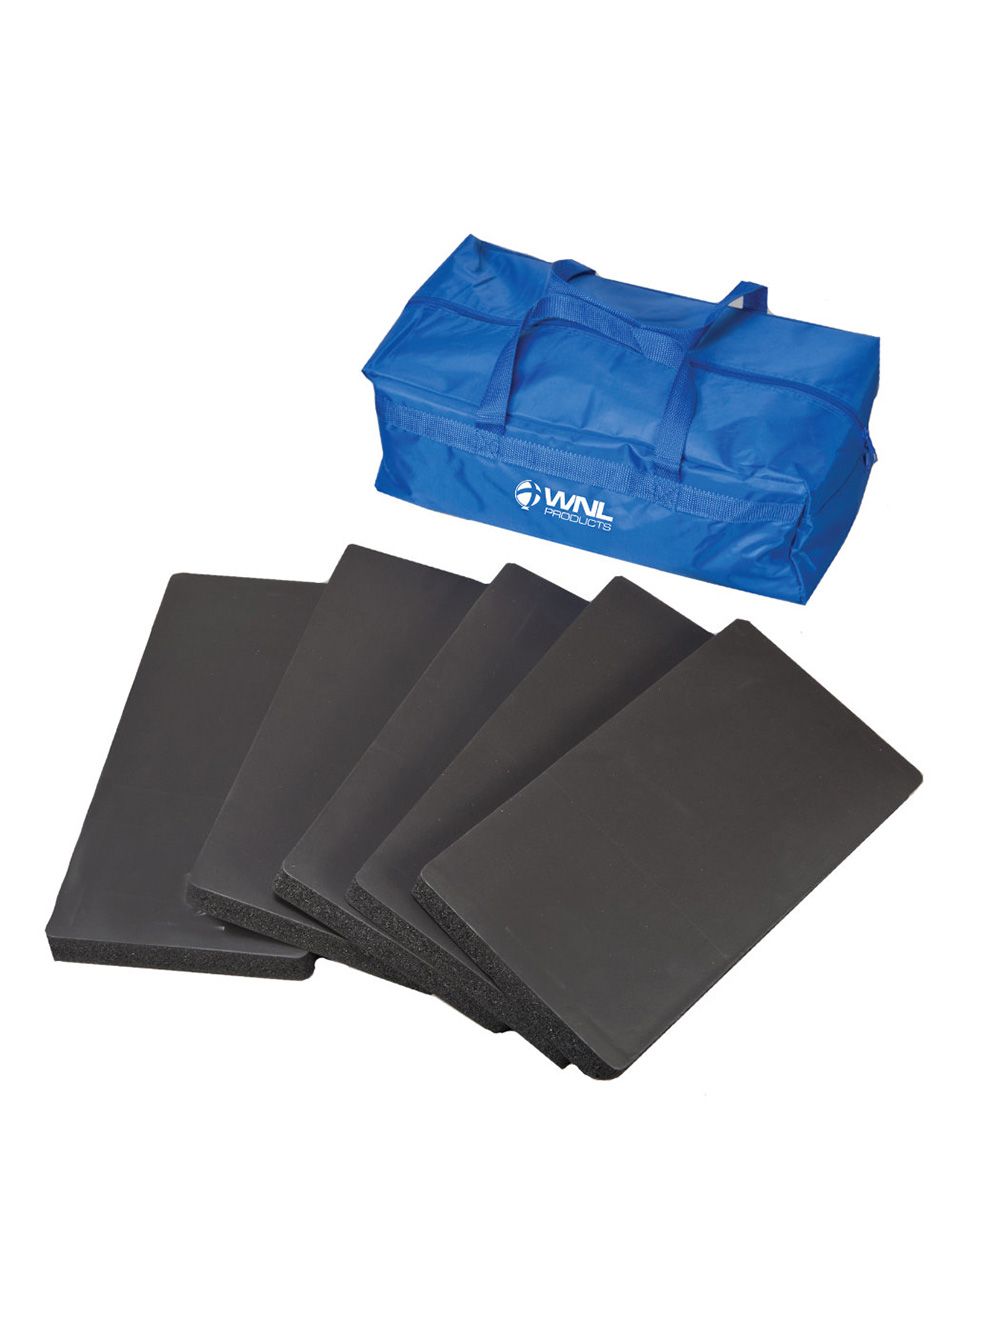 Foam kneeling pads for less strain on the knees and back during CPR training